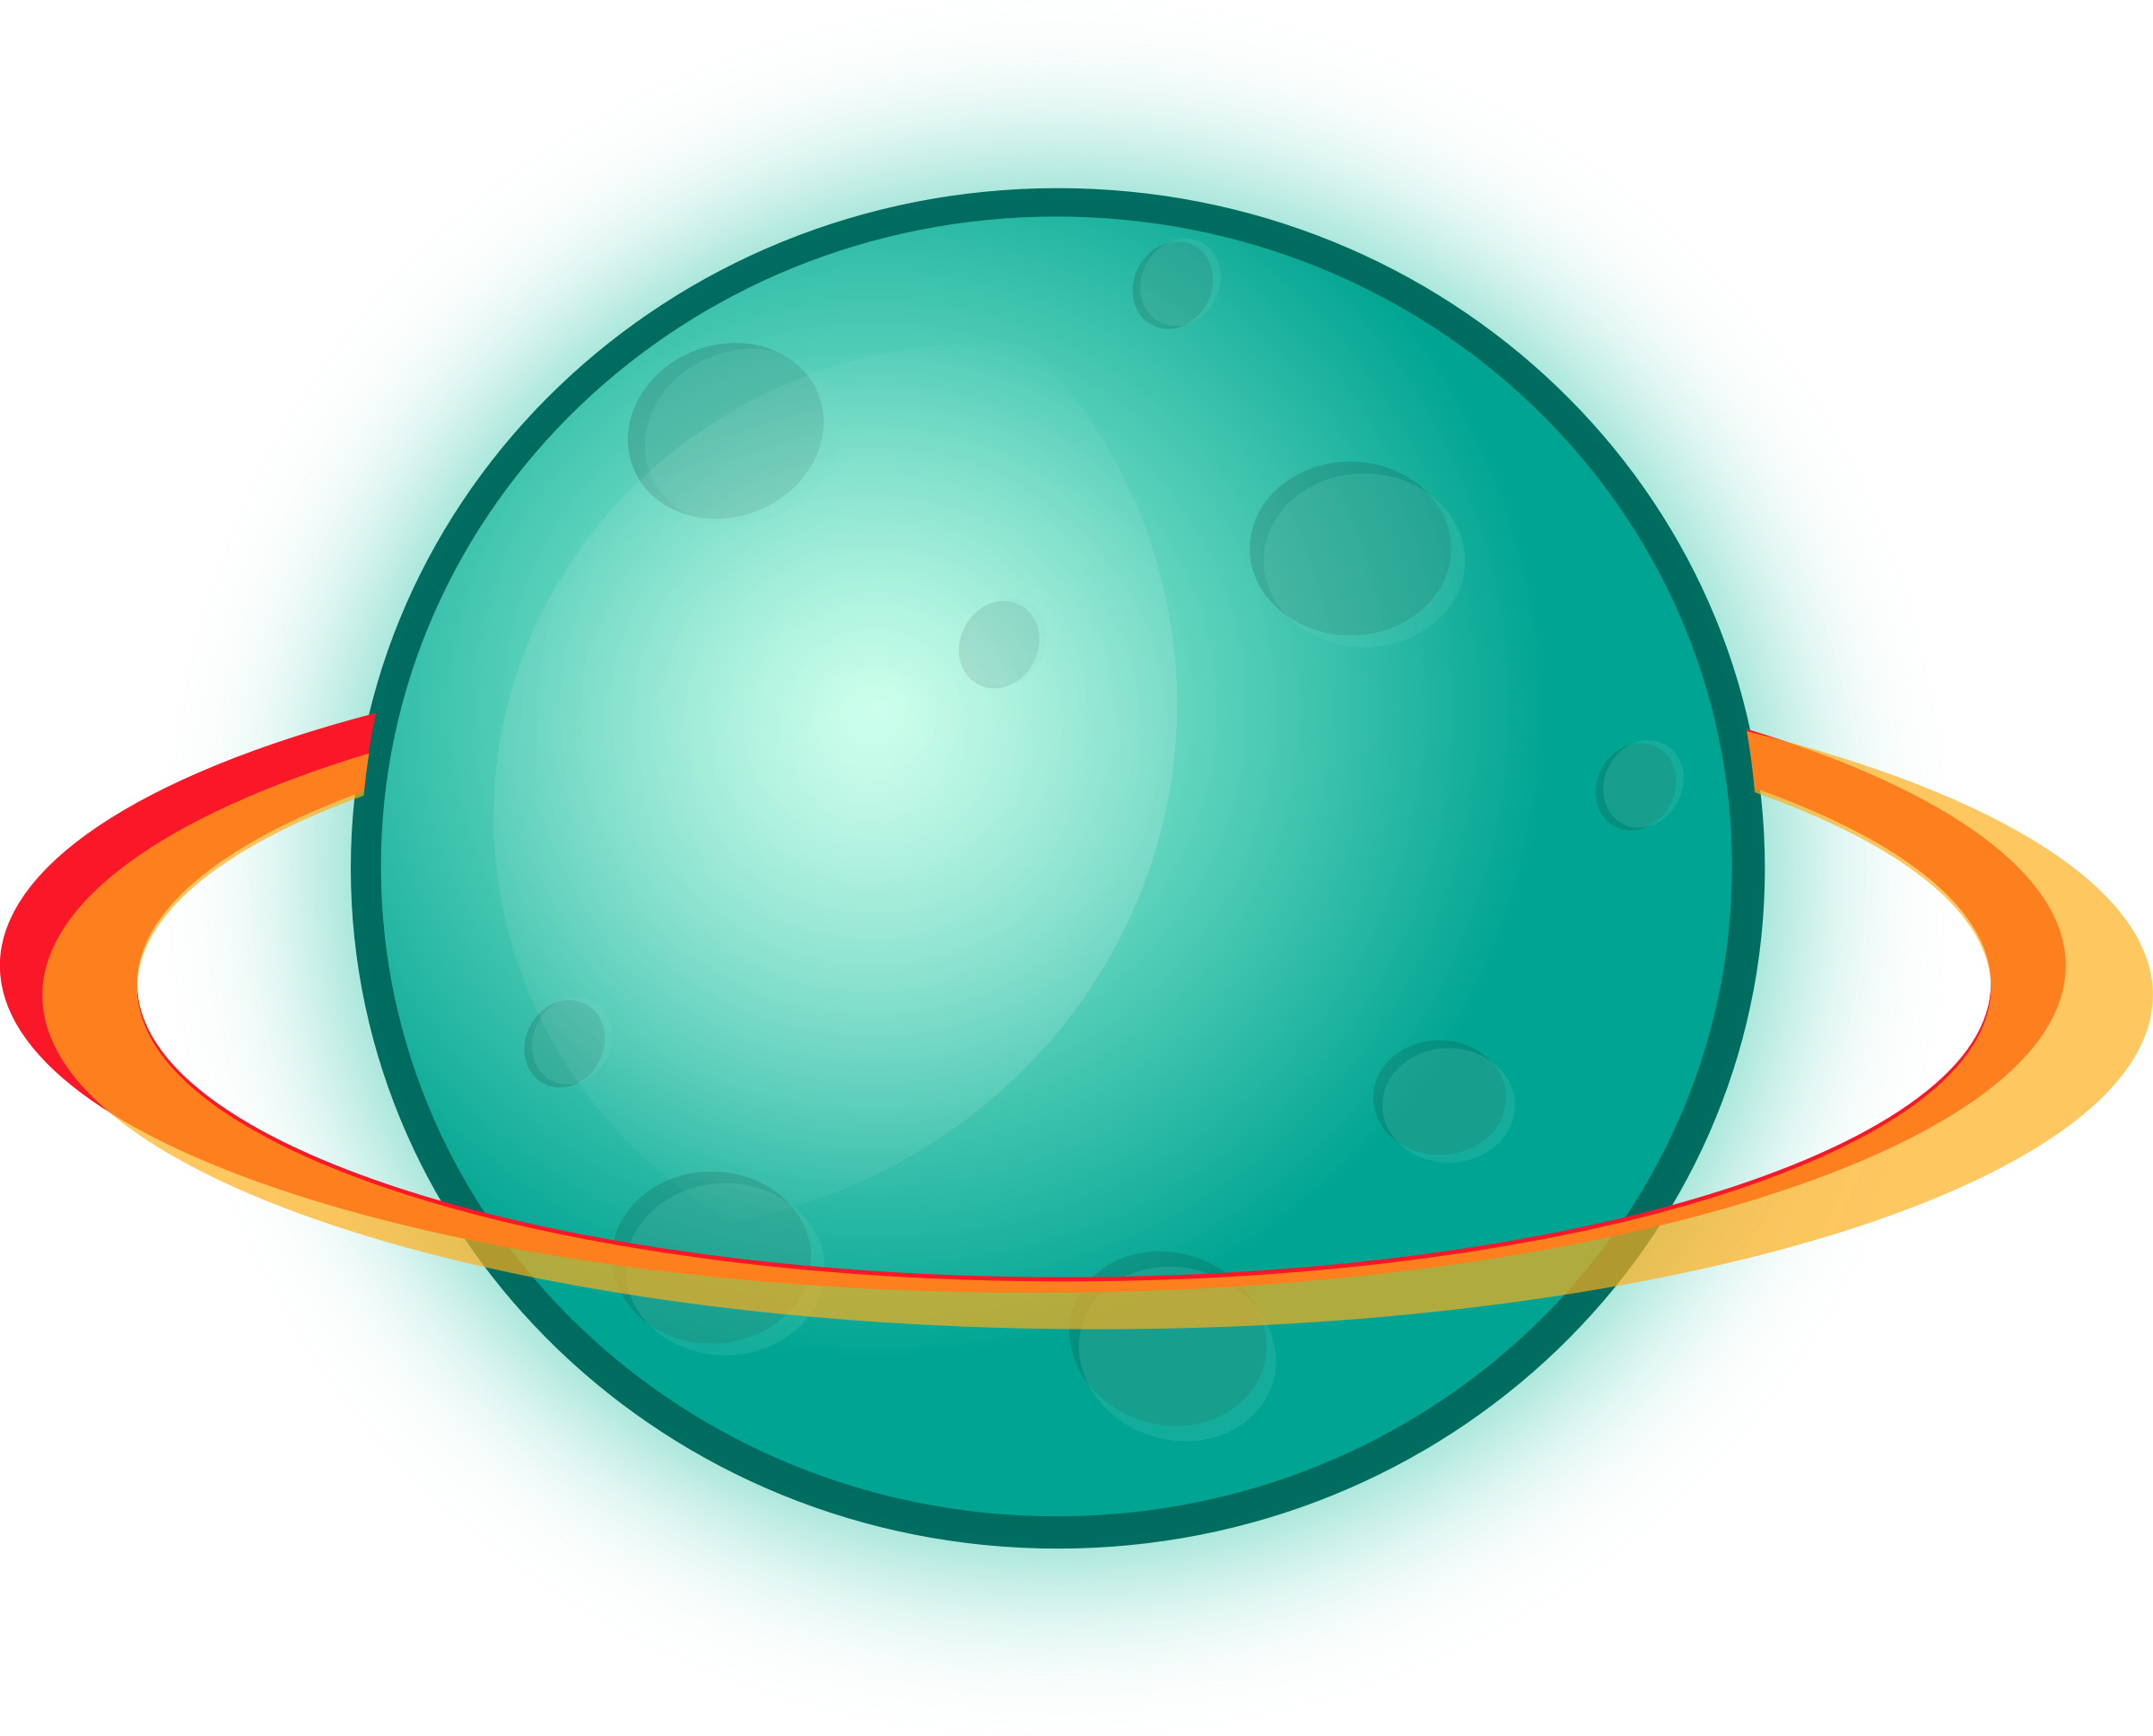 With rings by magnesus. Cute clipart planet